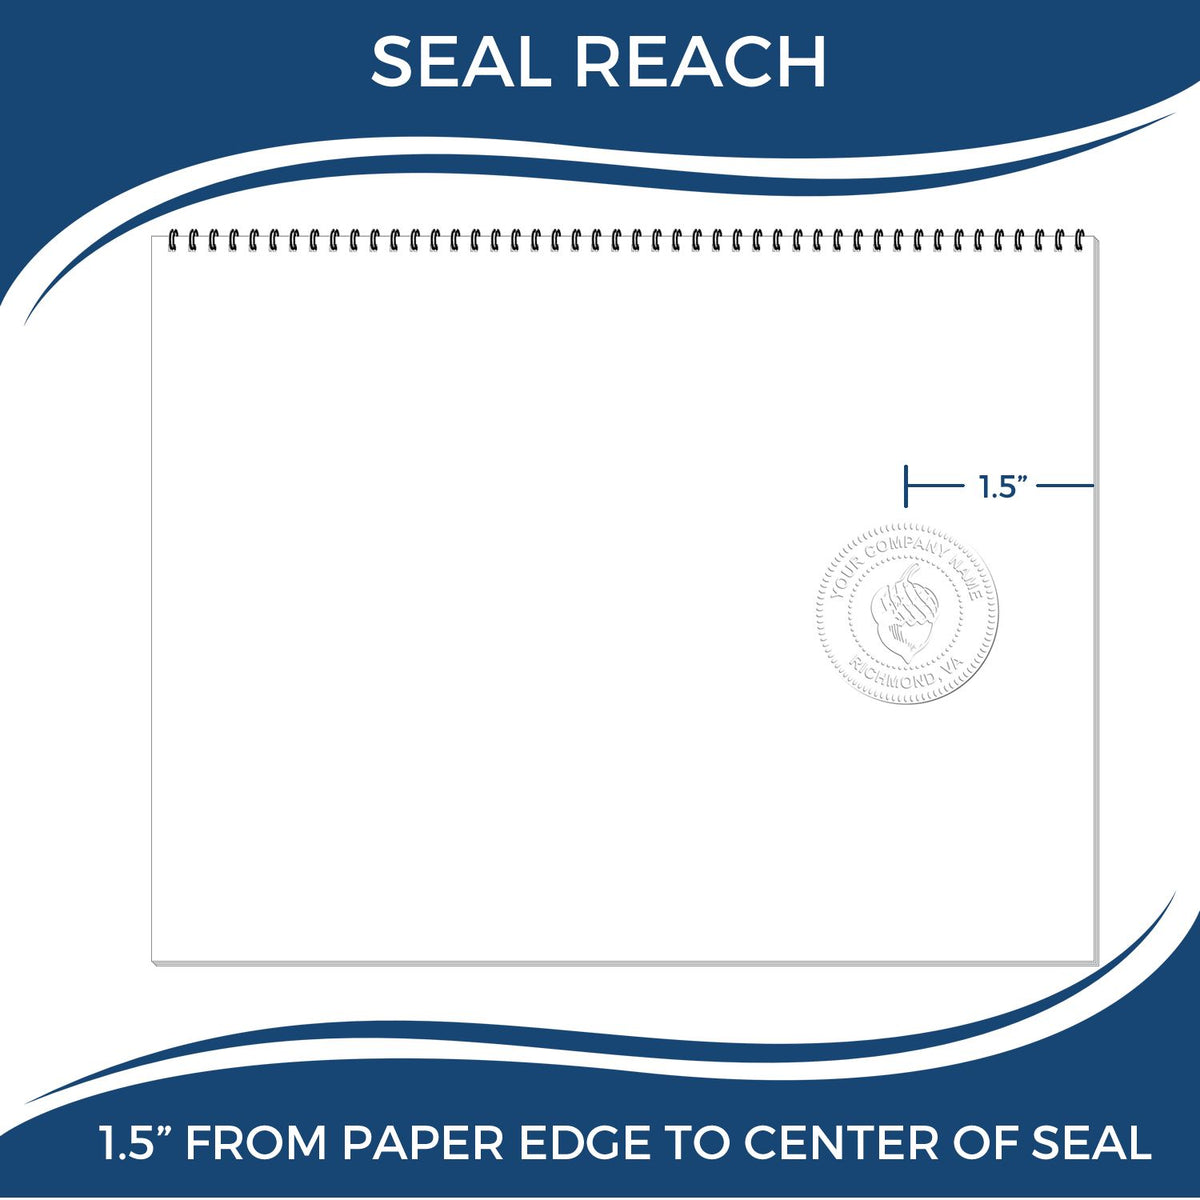 An infographic showing the seal reach which is represented by a ruler and a miniature seal image of the Handheld Pennsylvania Professional Geologist Embosser